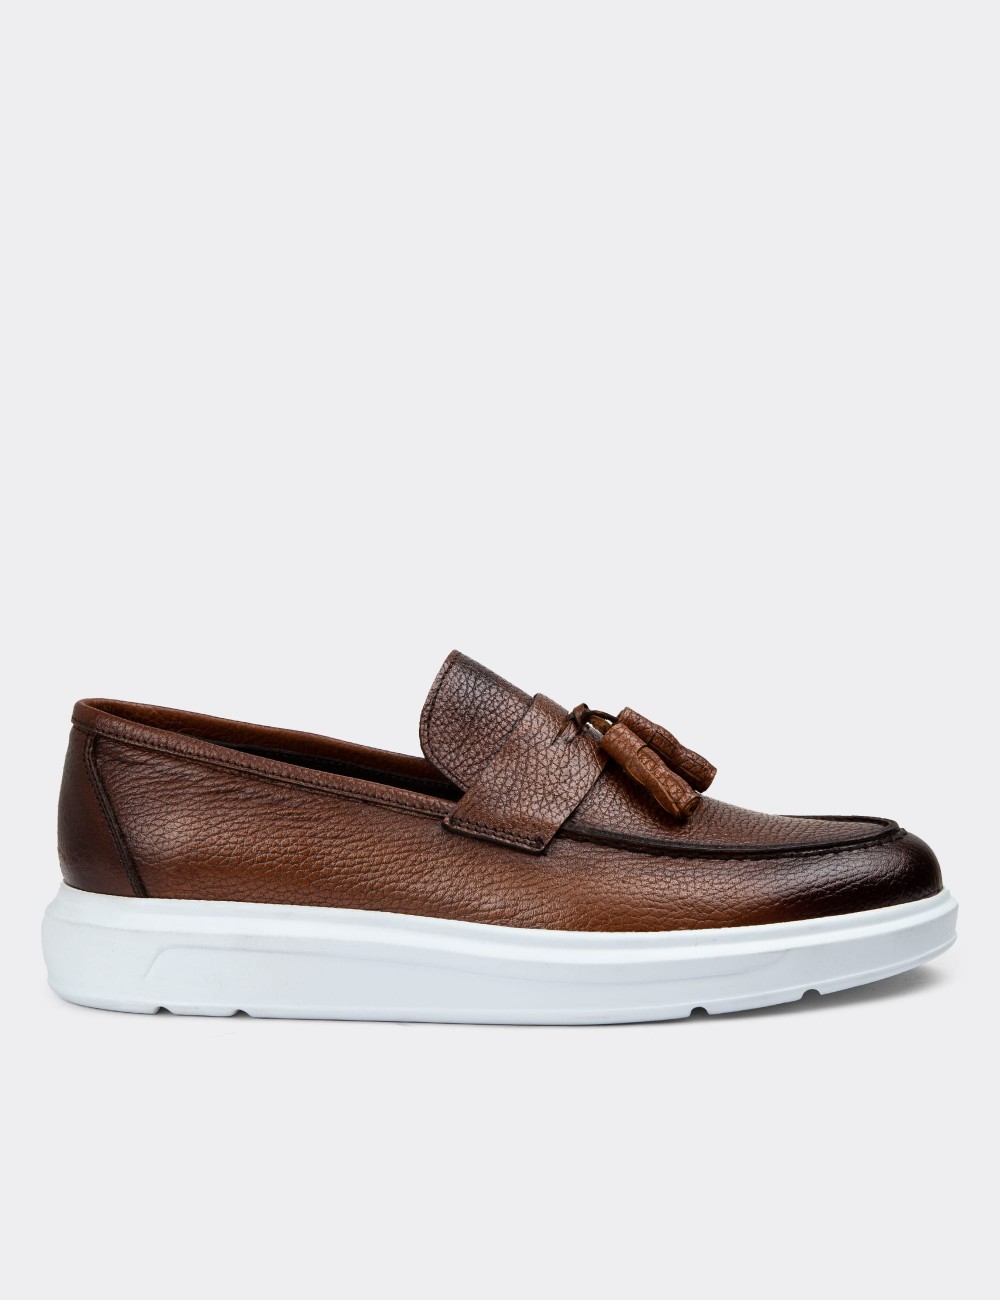 Tan Leather Loafers - 01587MTBAP08